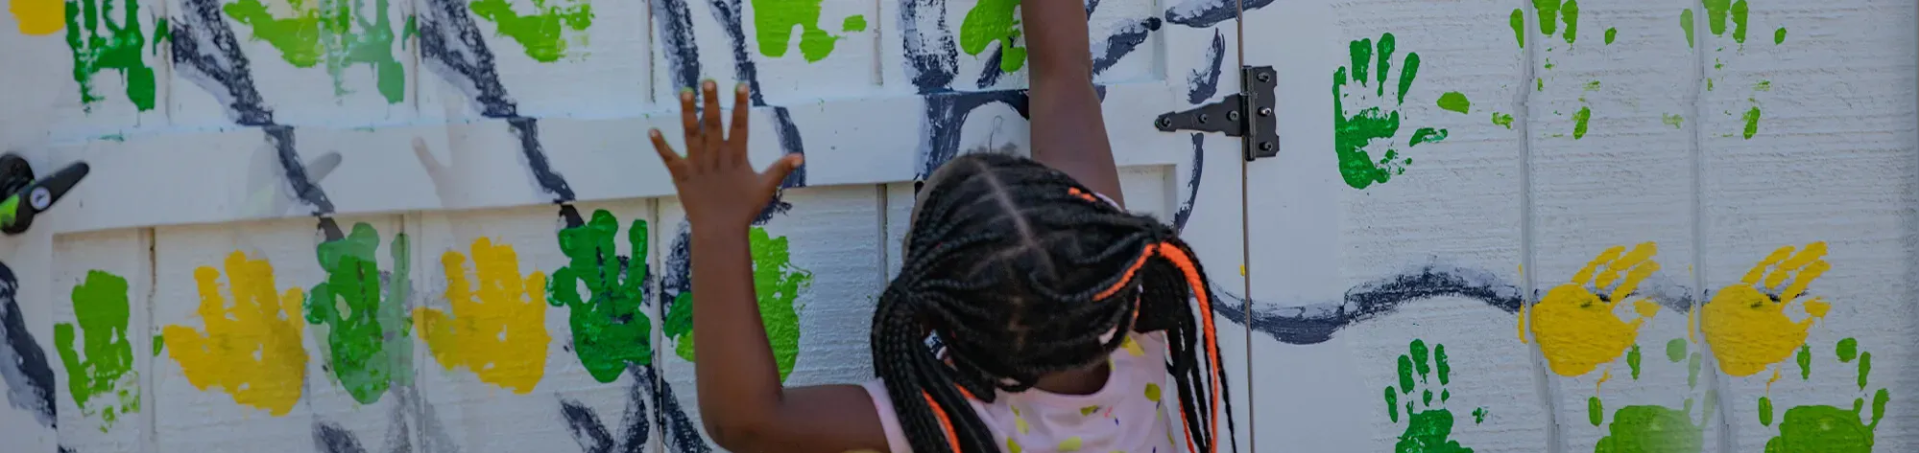 kid paiting a wall using her hand